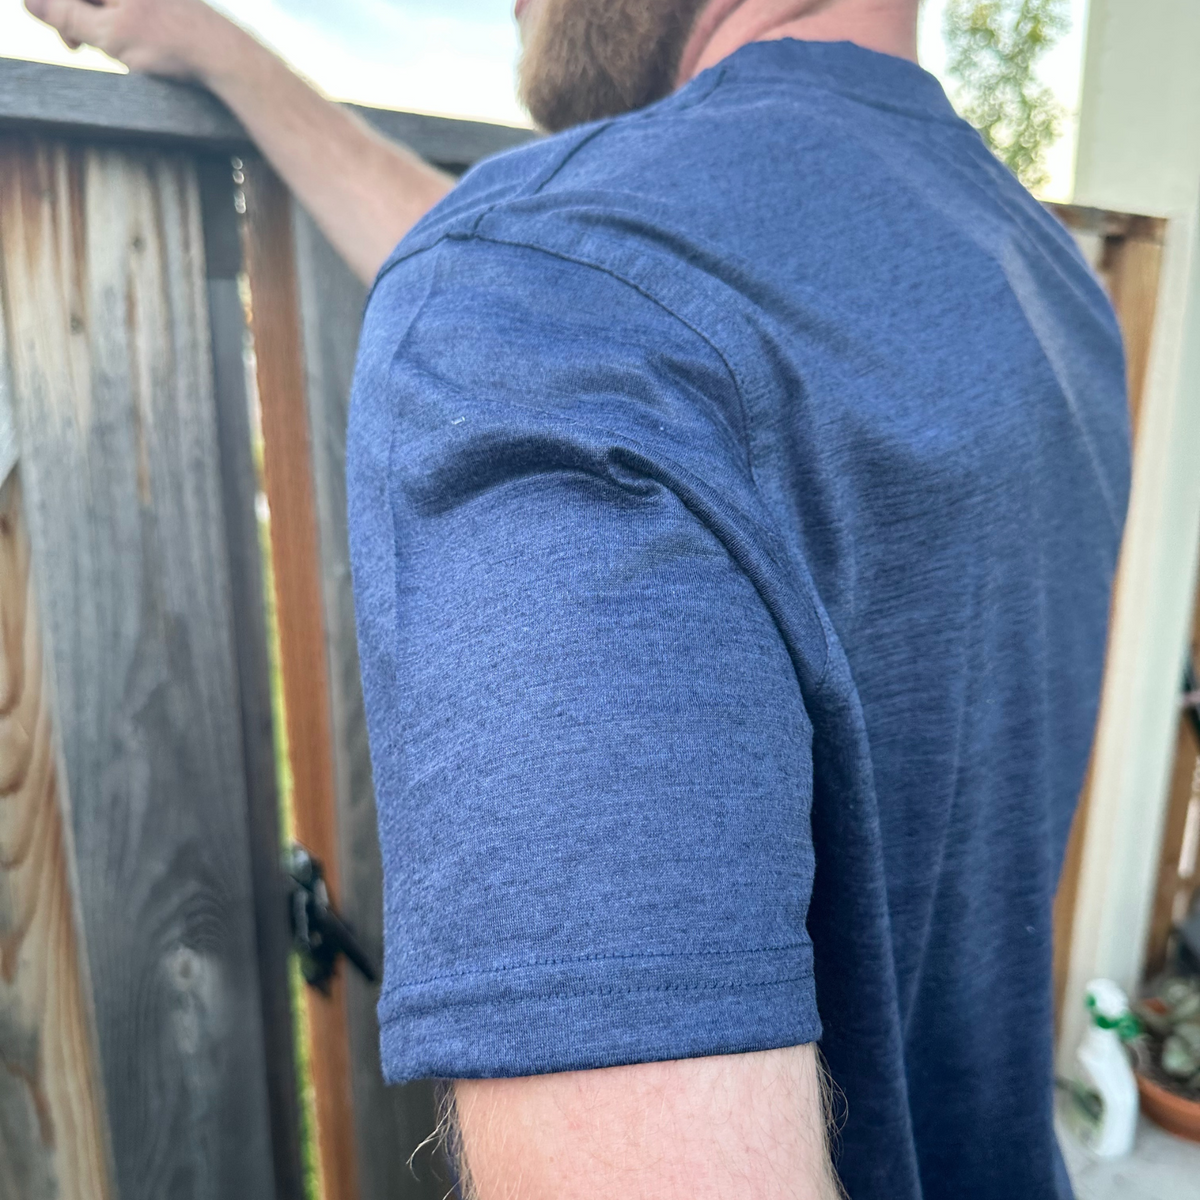 A close up of the sleeve of a navy blue Alpacas of Montana lightweight athletic activewear outerwear breathable moisture wicking antimicrobial soft comfortable exercise short sleeve alpaca men&#39;s performance tee for running sports exercise work out hiking climbing camping skiing biking